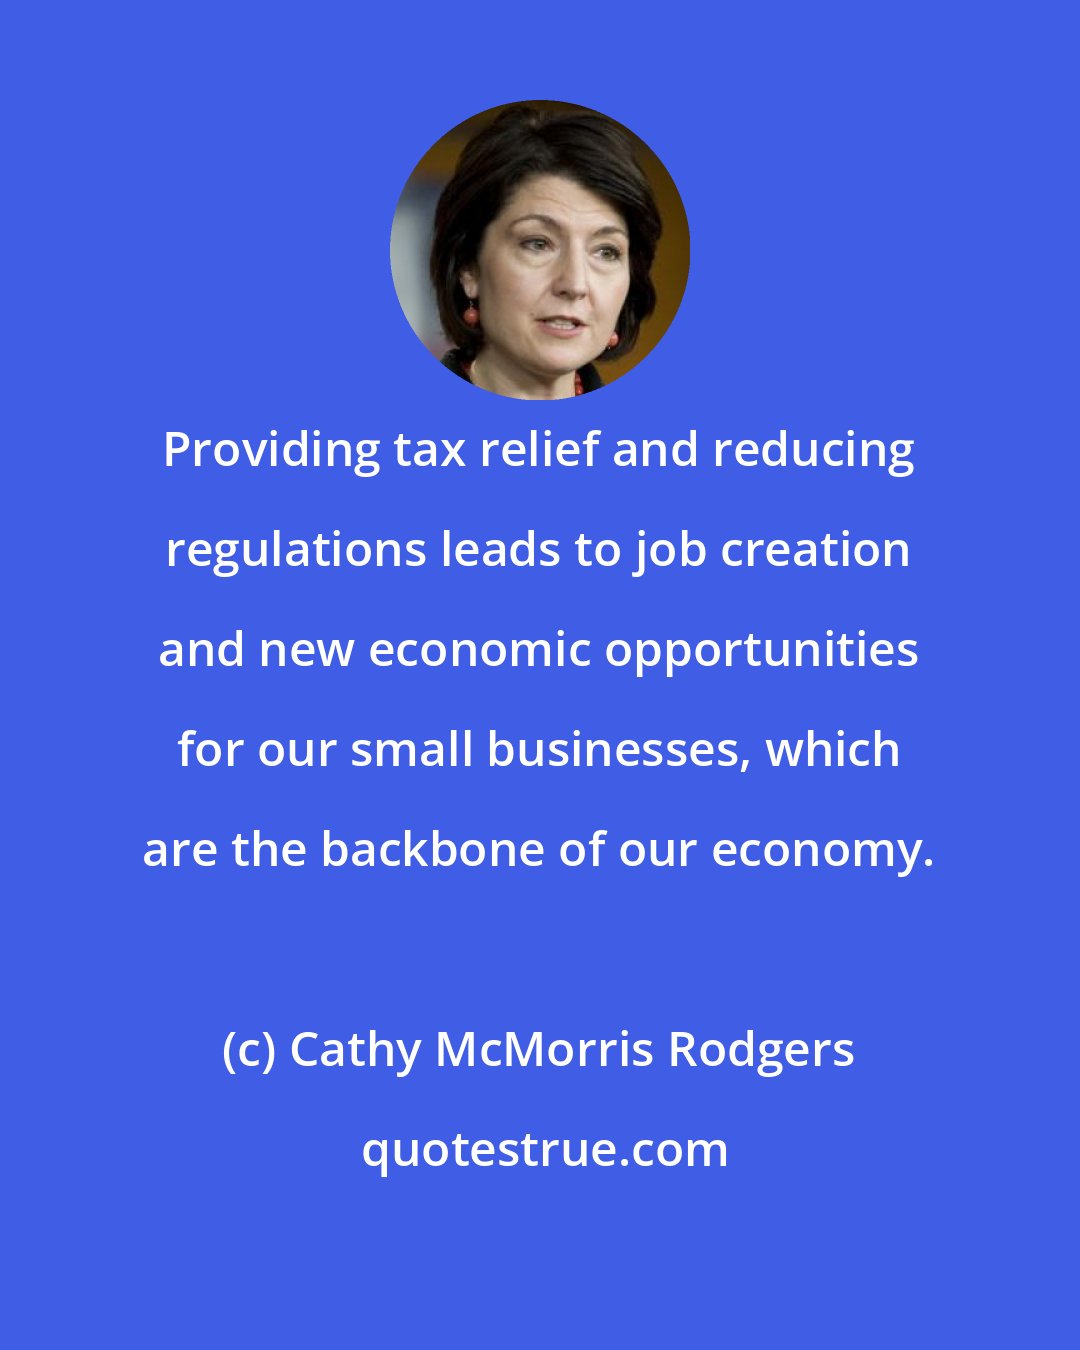 Cathy McMorris Rodgers: Providing tax relief and reducing regulations leads to job creation and new economic opportunities for our small businesses, which are the backbone of our economy.